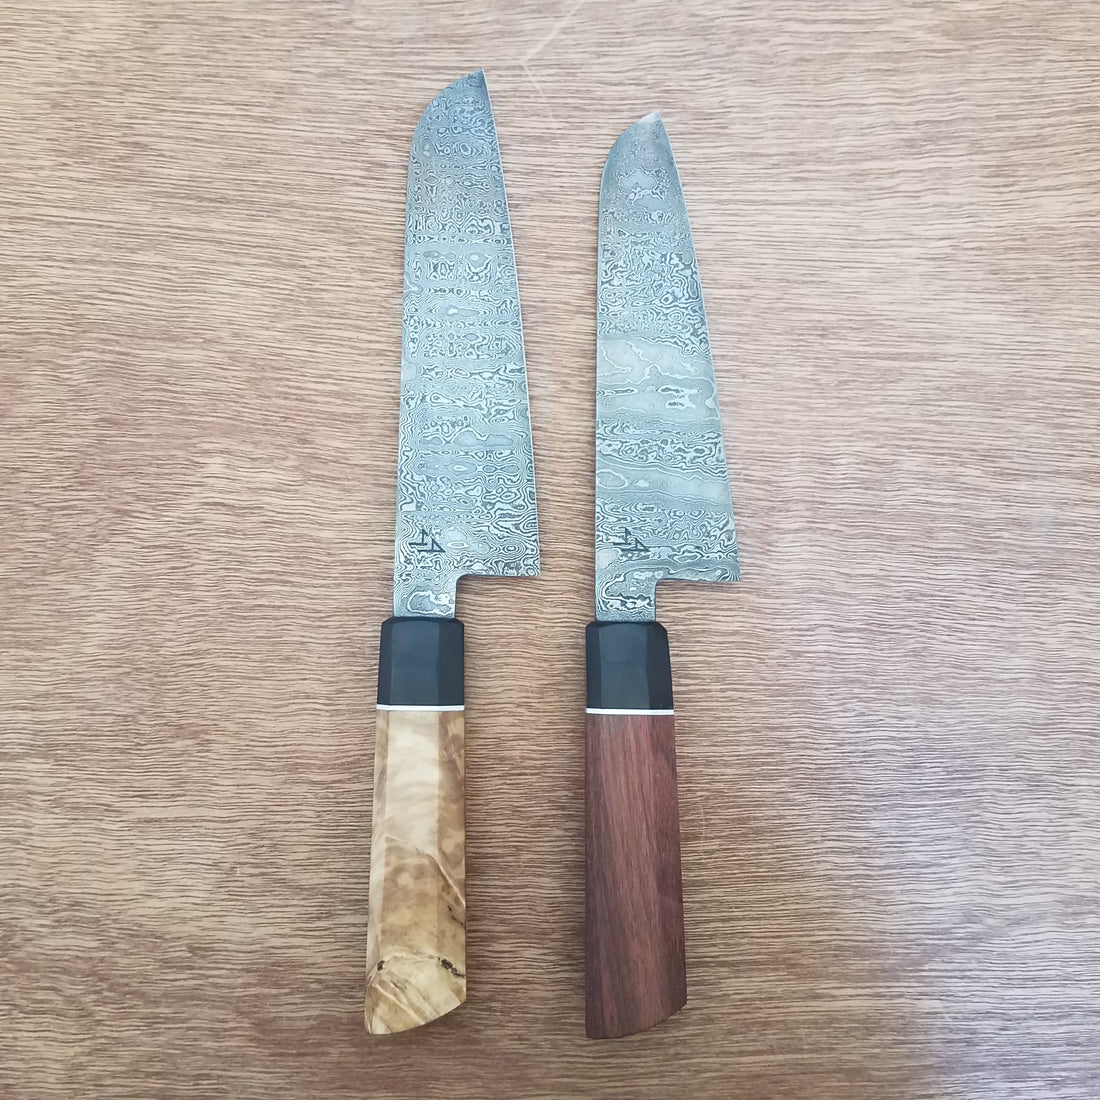 Brian Hanson's hand forged damascus knives are here!